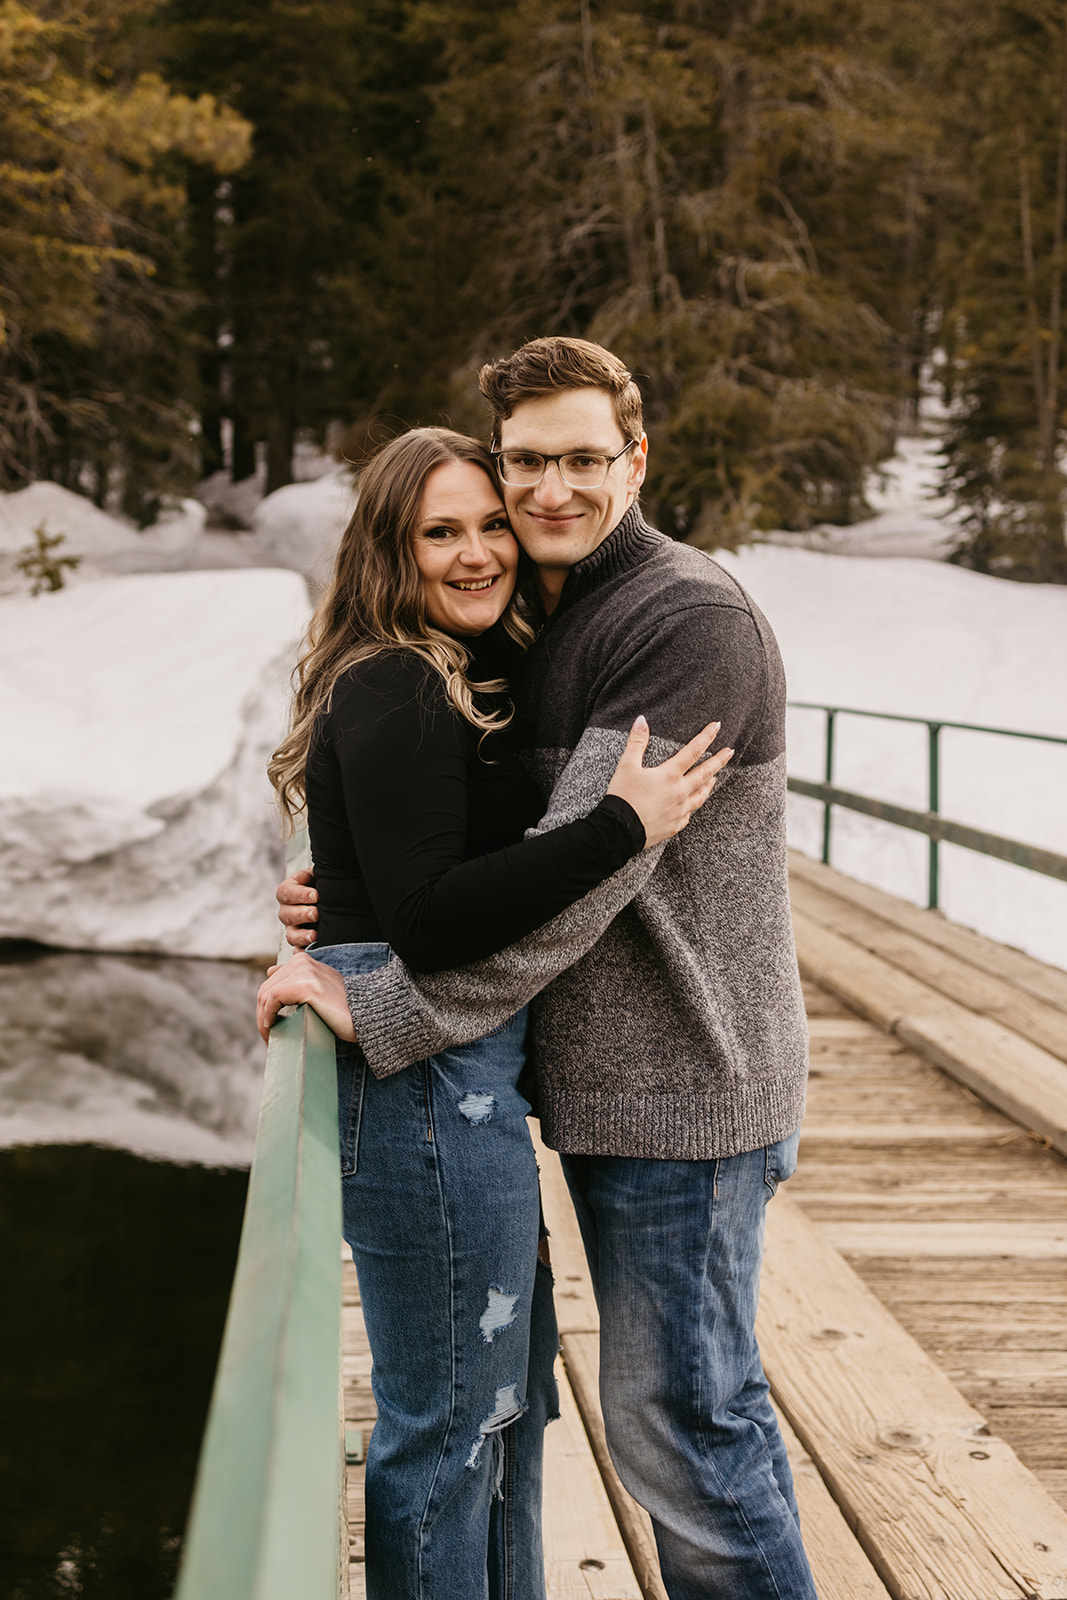 Truckee River Couples Session